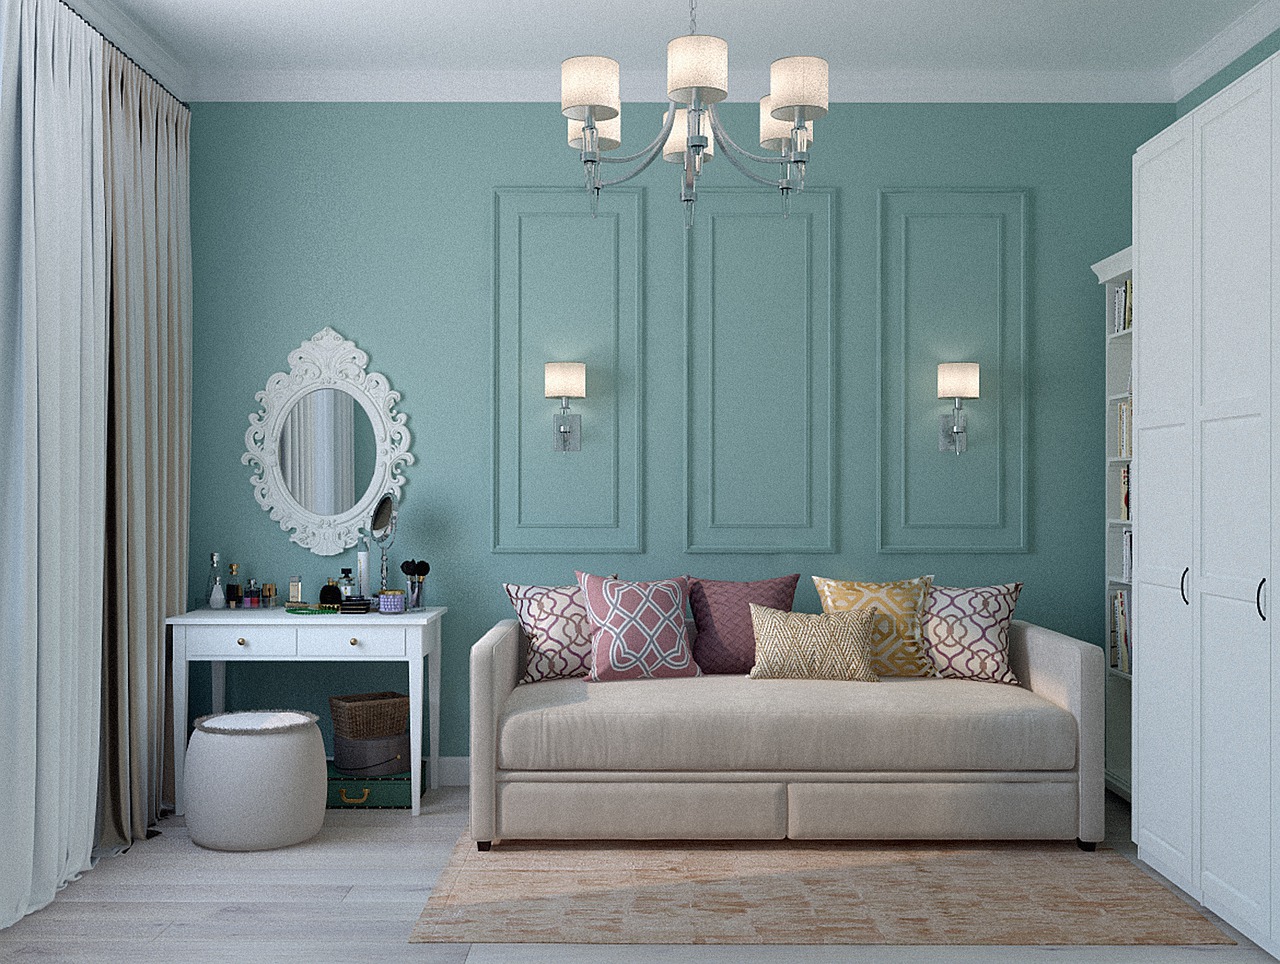 Why is turquoise good for home interiors?